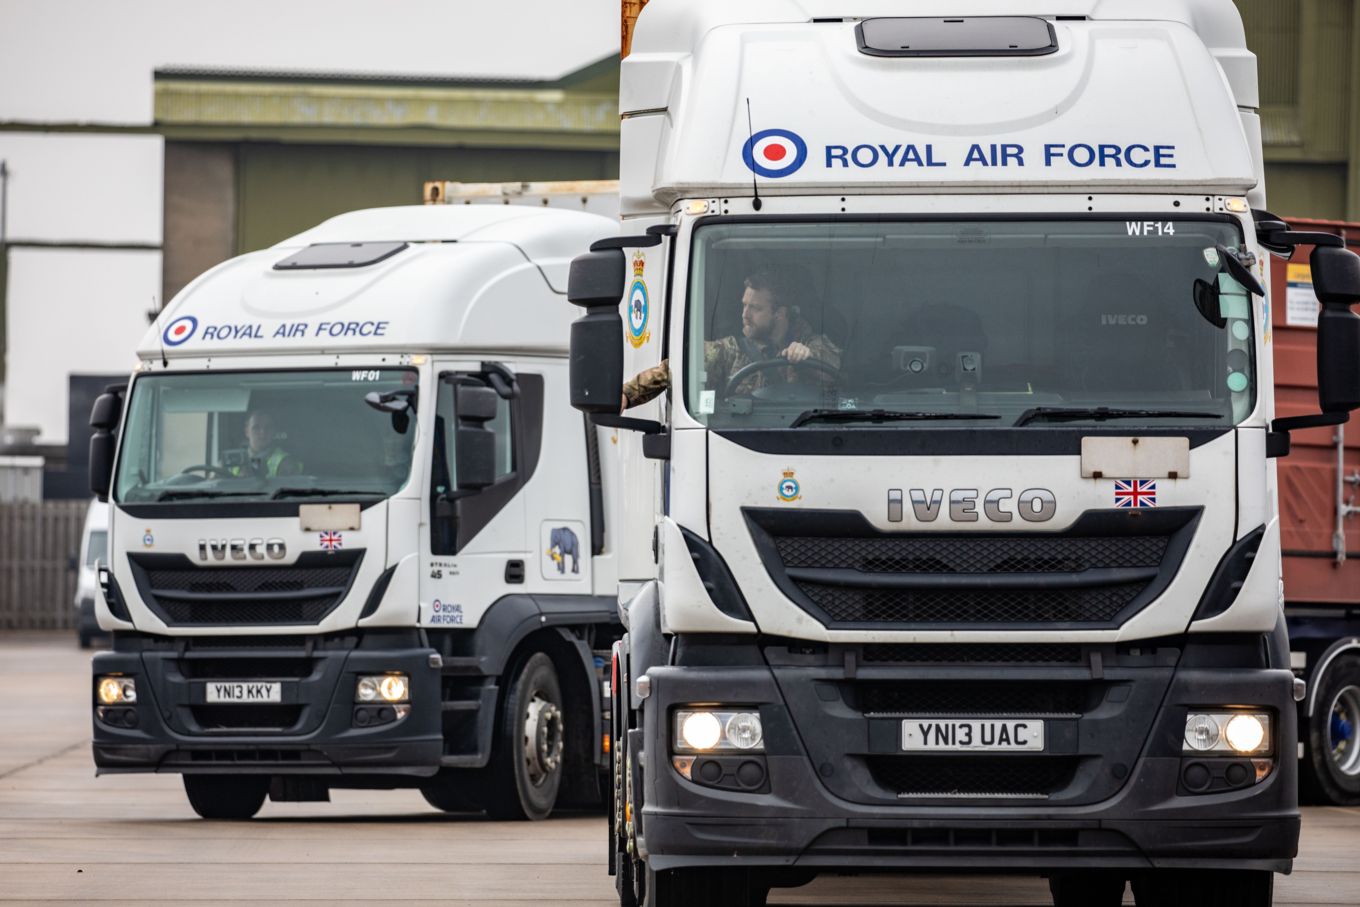 The trucks from 2 (MT) Squadron roll out from RAF Wittering on their way to Marchwood